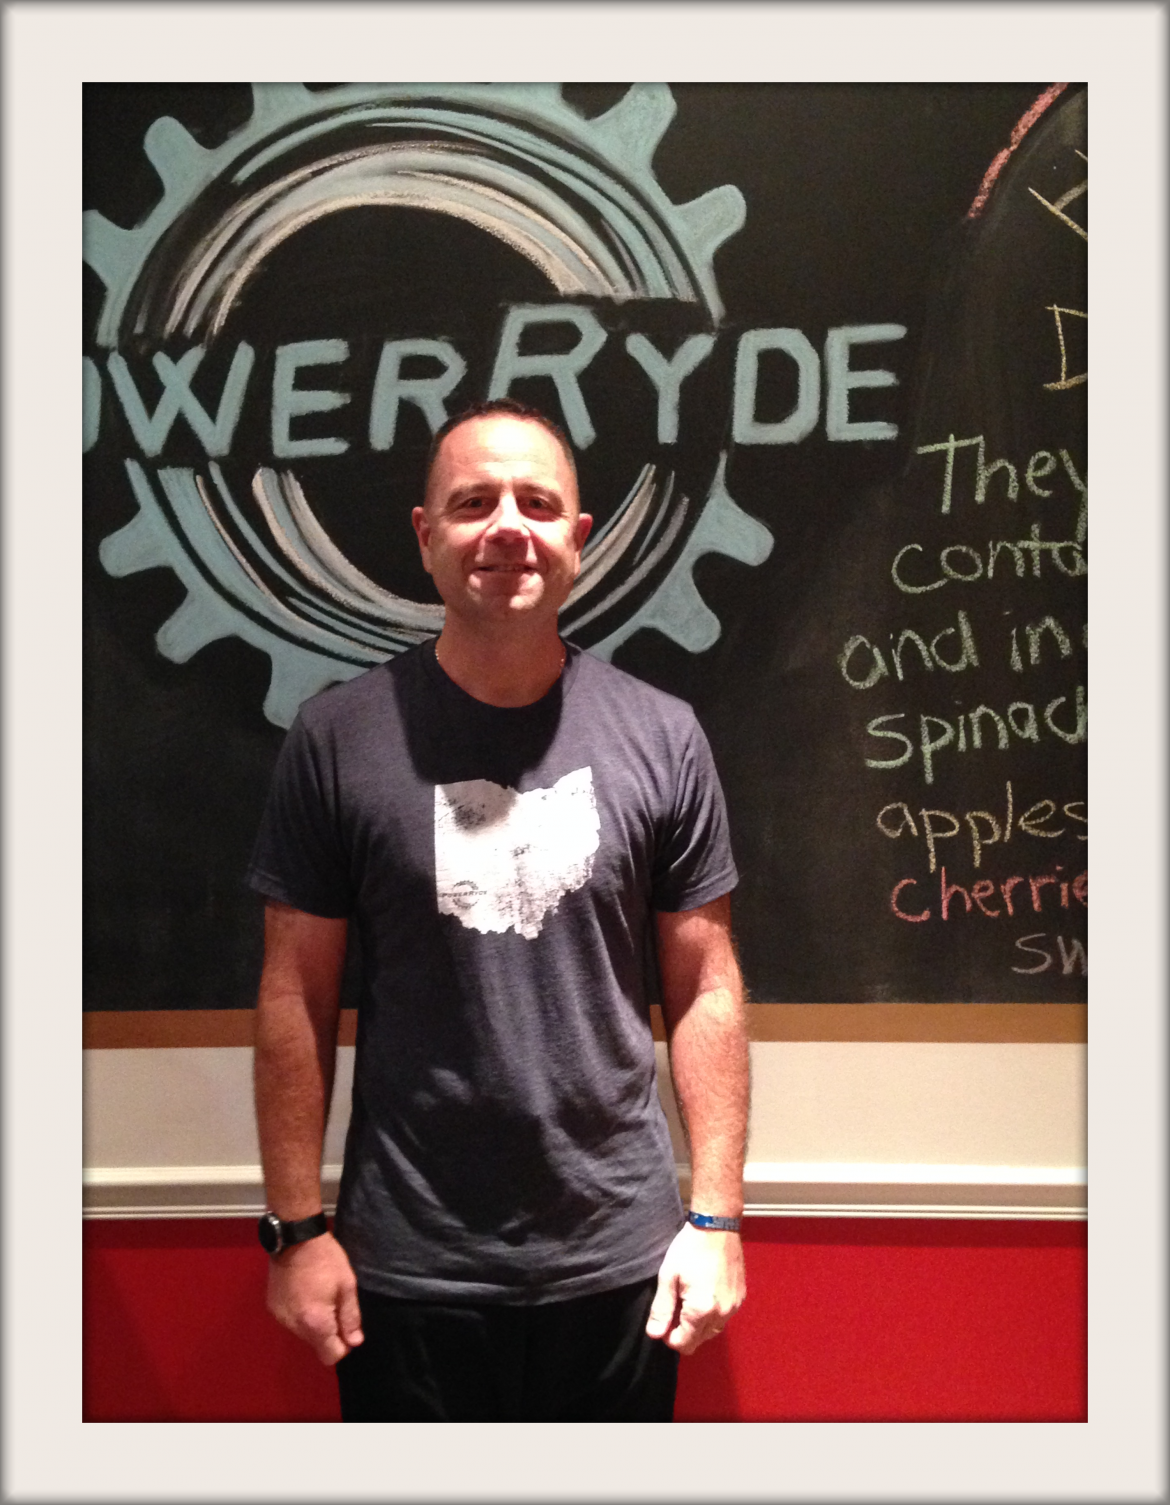 John Pavia in front of chalk PowerRyde logo